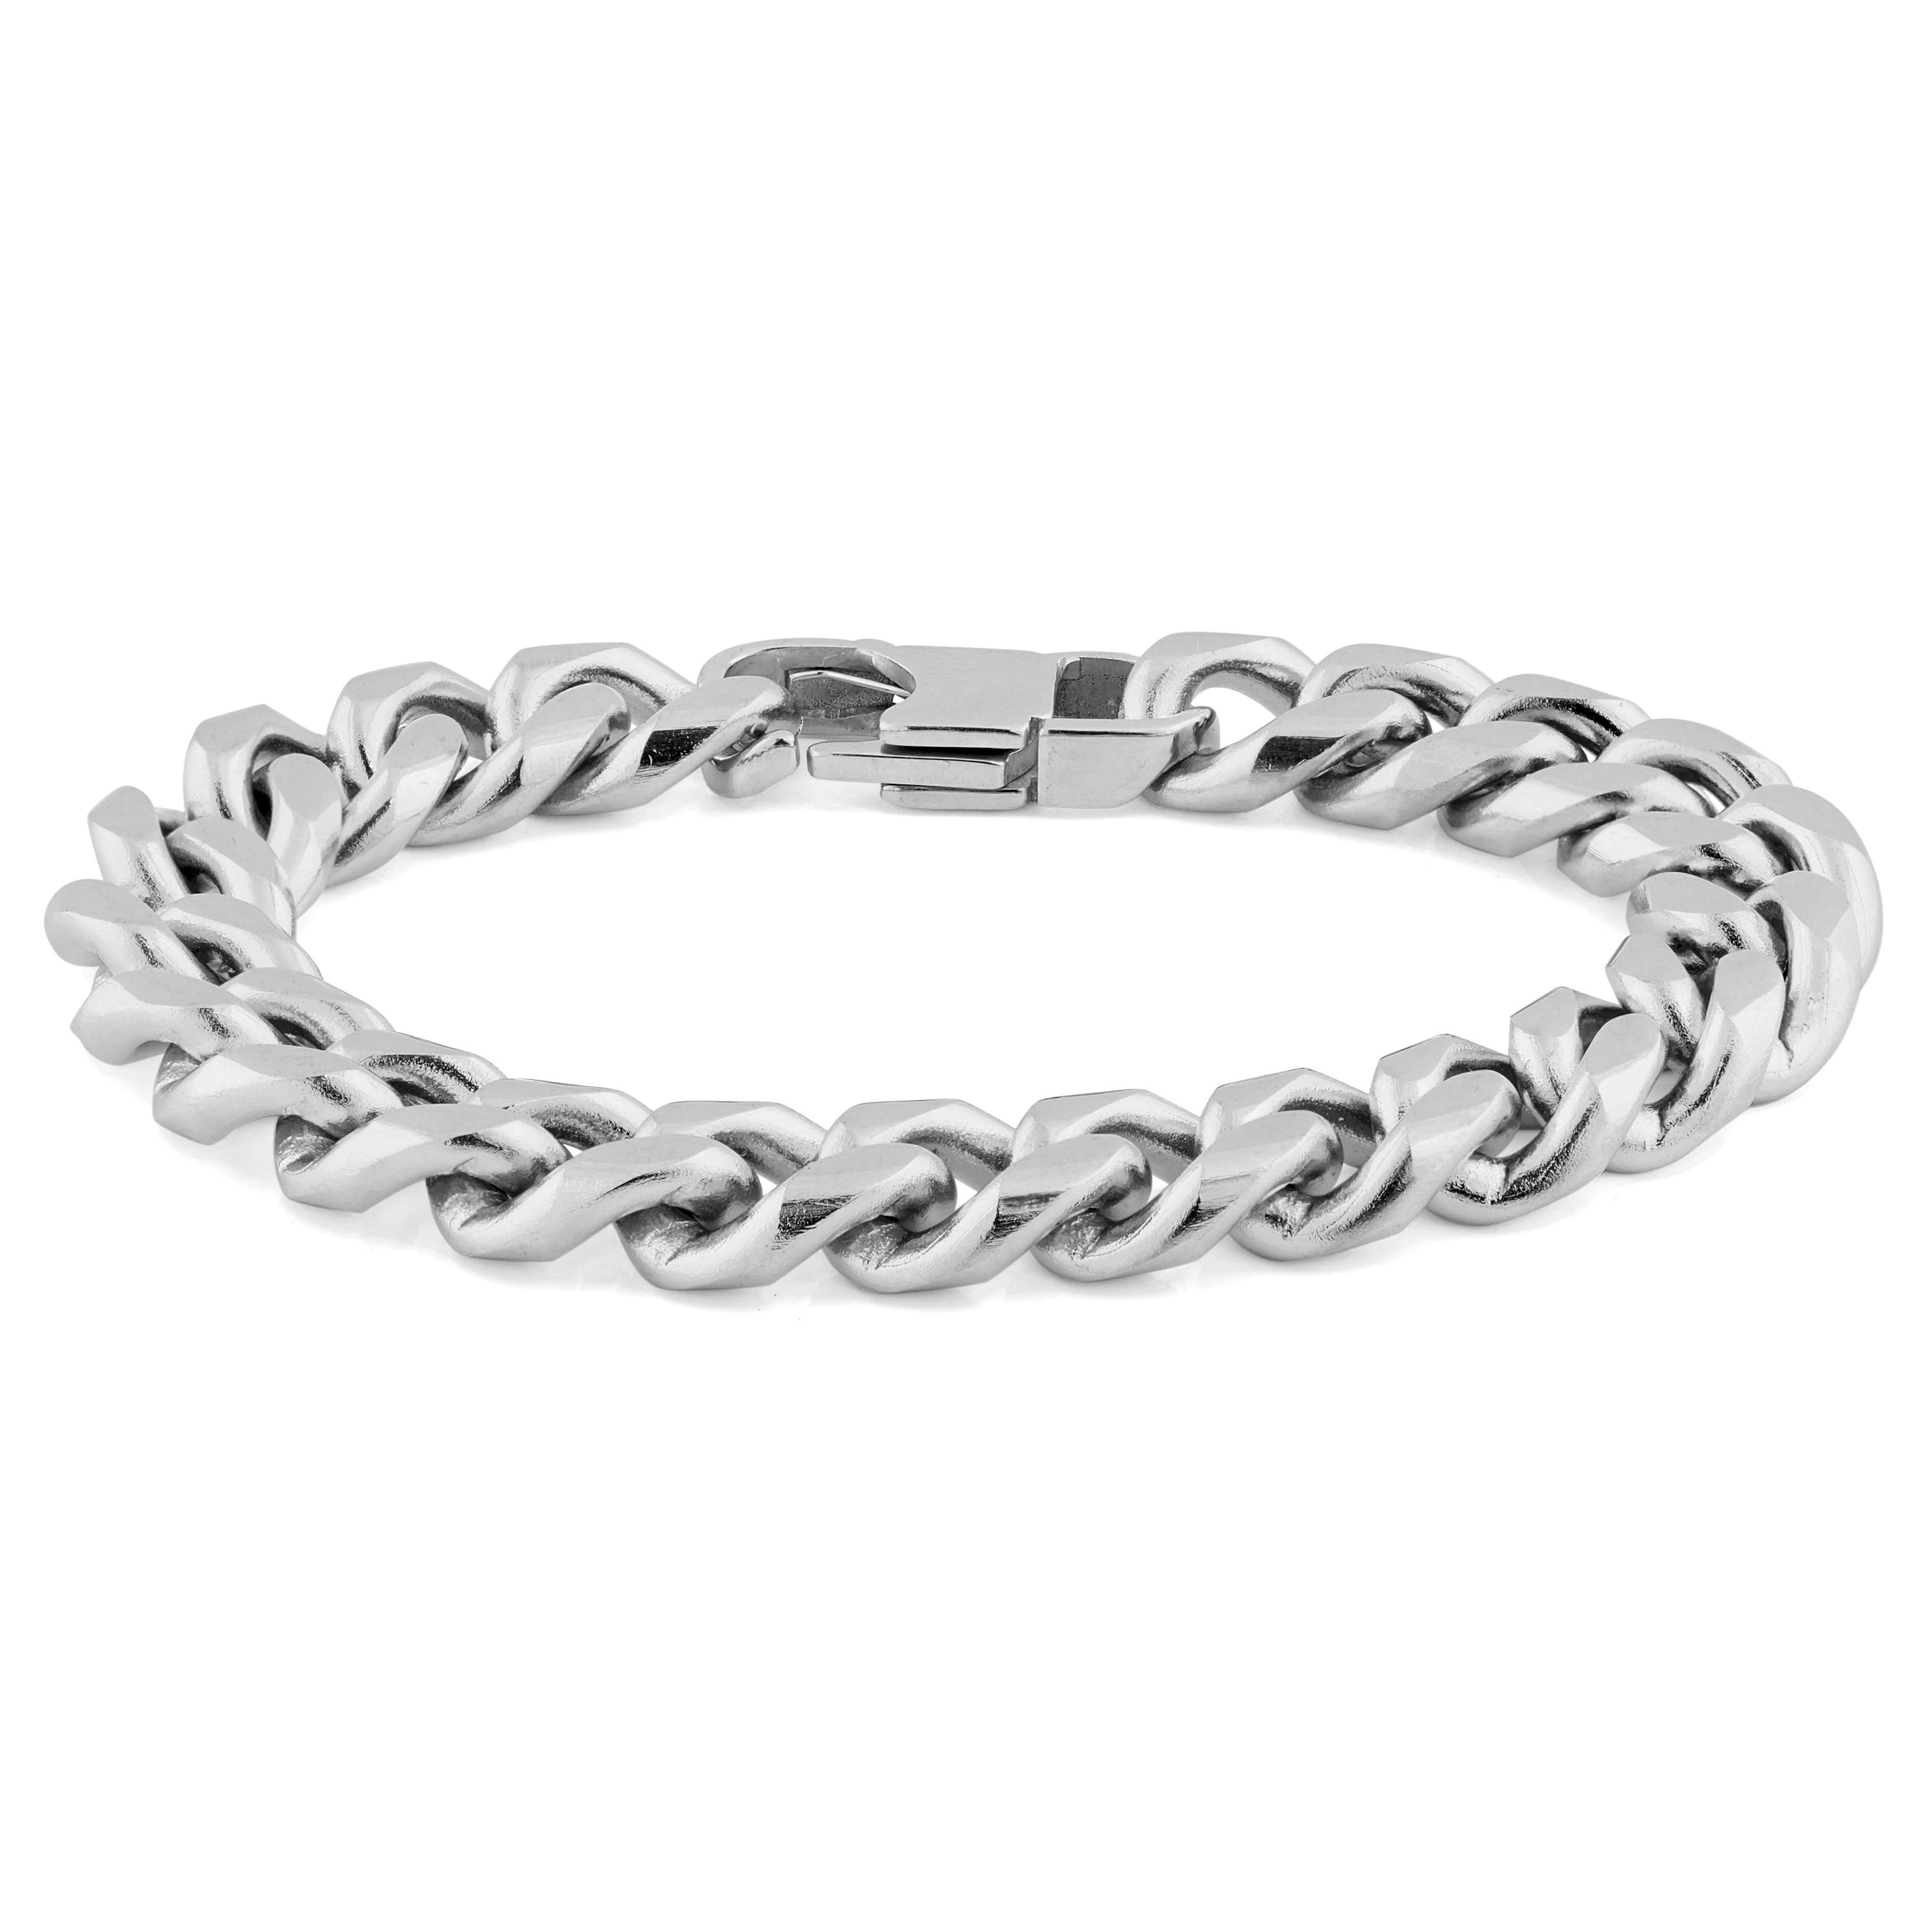 10mm Silver-Tone Stainless Steel Curb Chain Bracelet